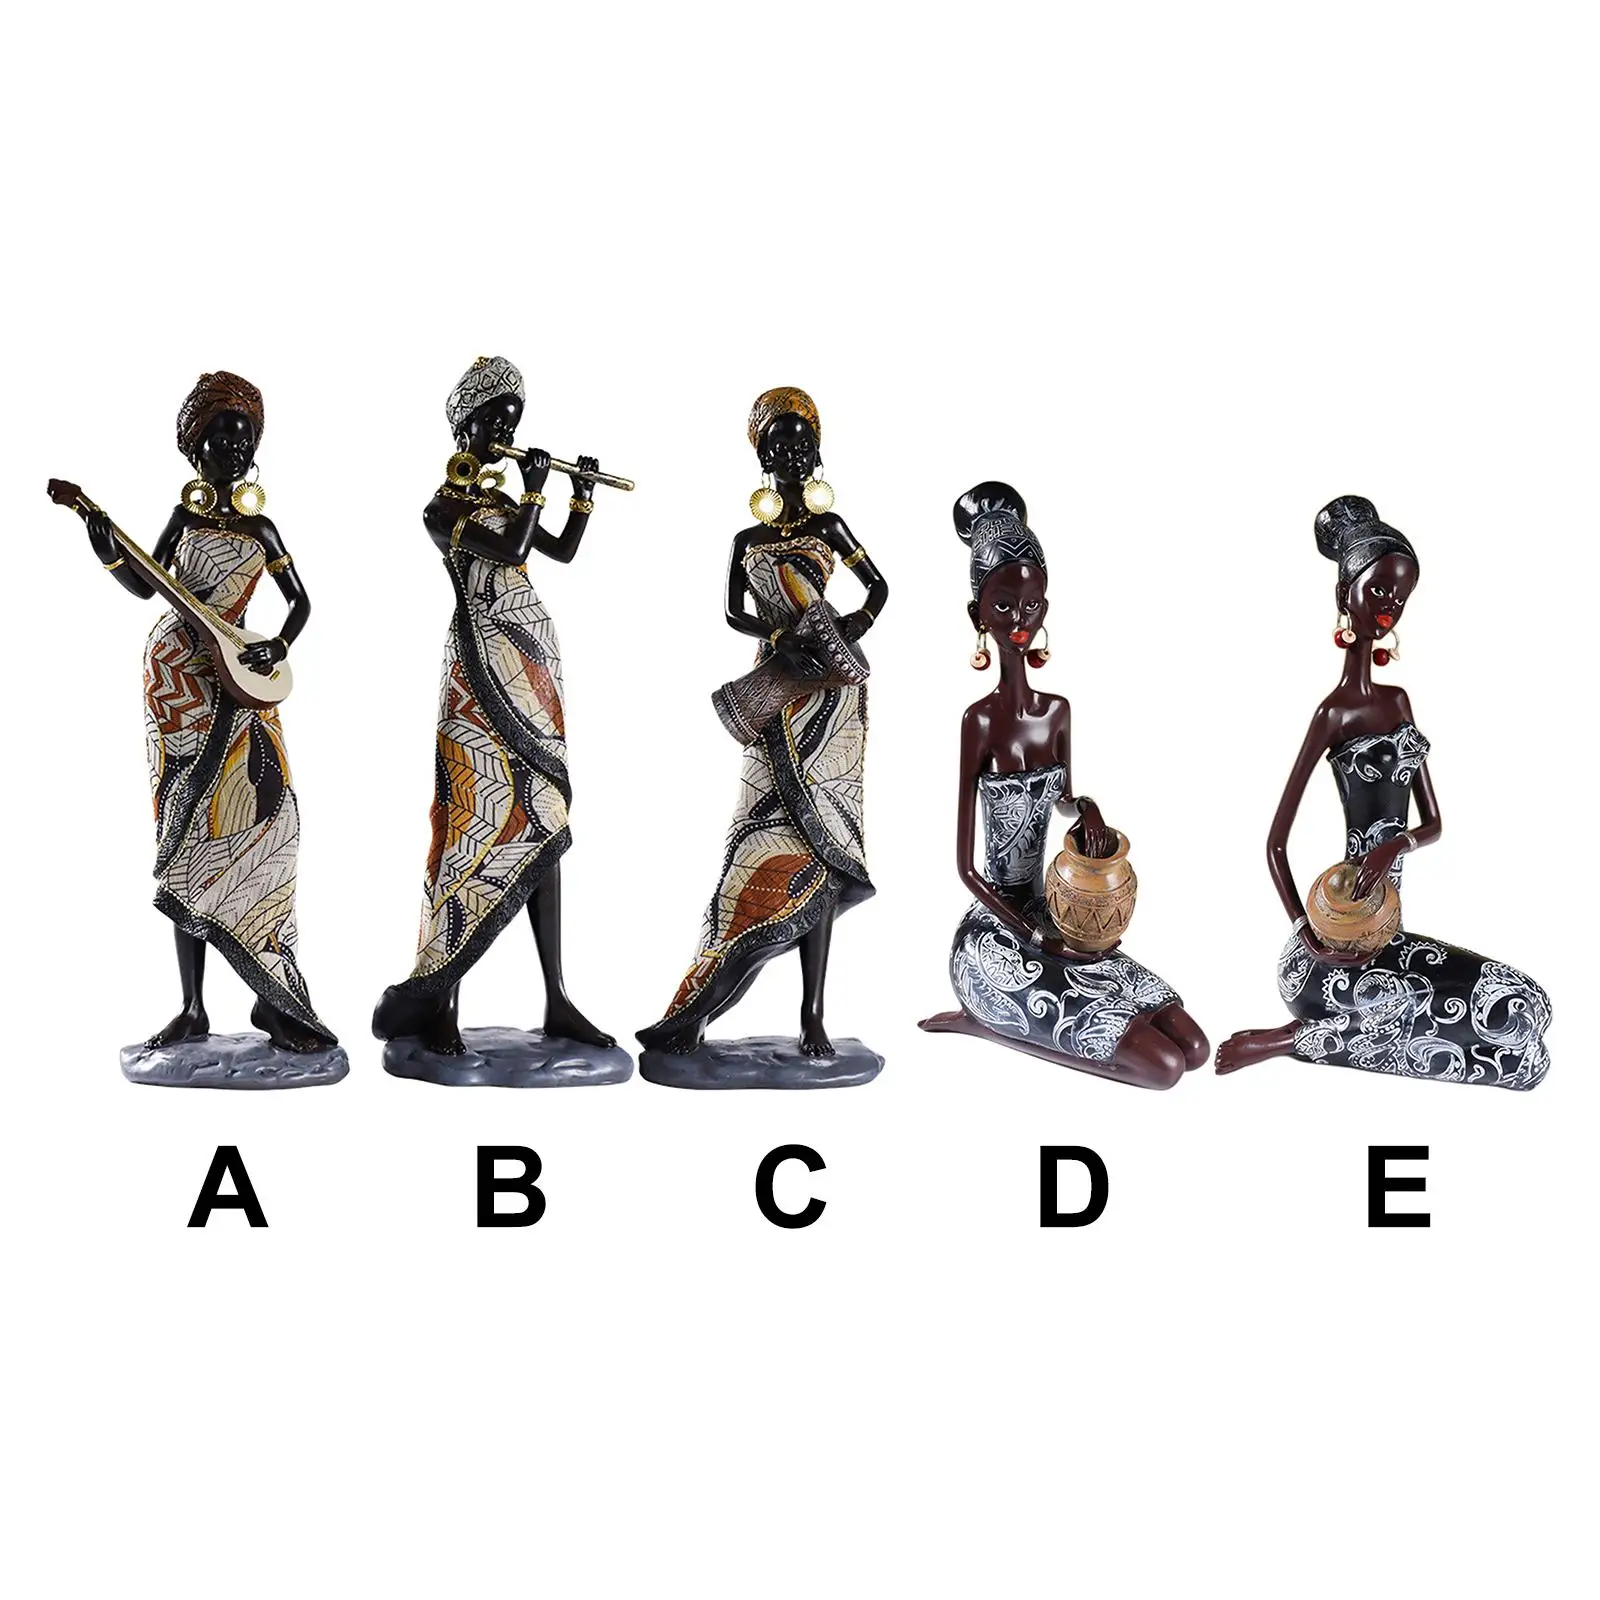 African Lady Figurine Tribal Female Statue Collection for Desktop Home Decor